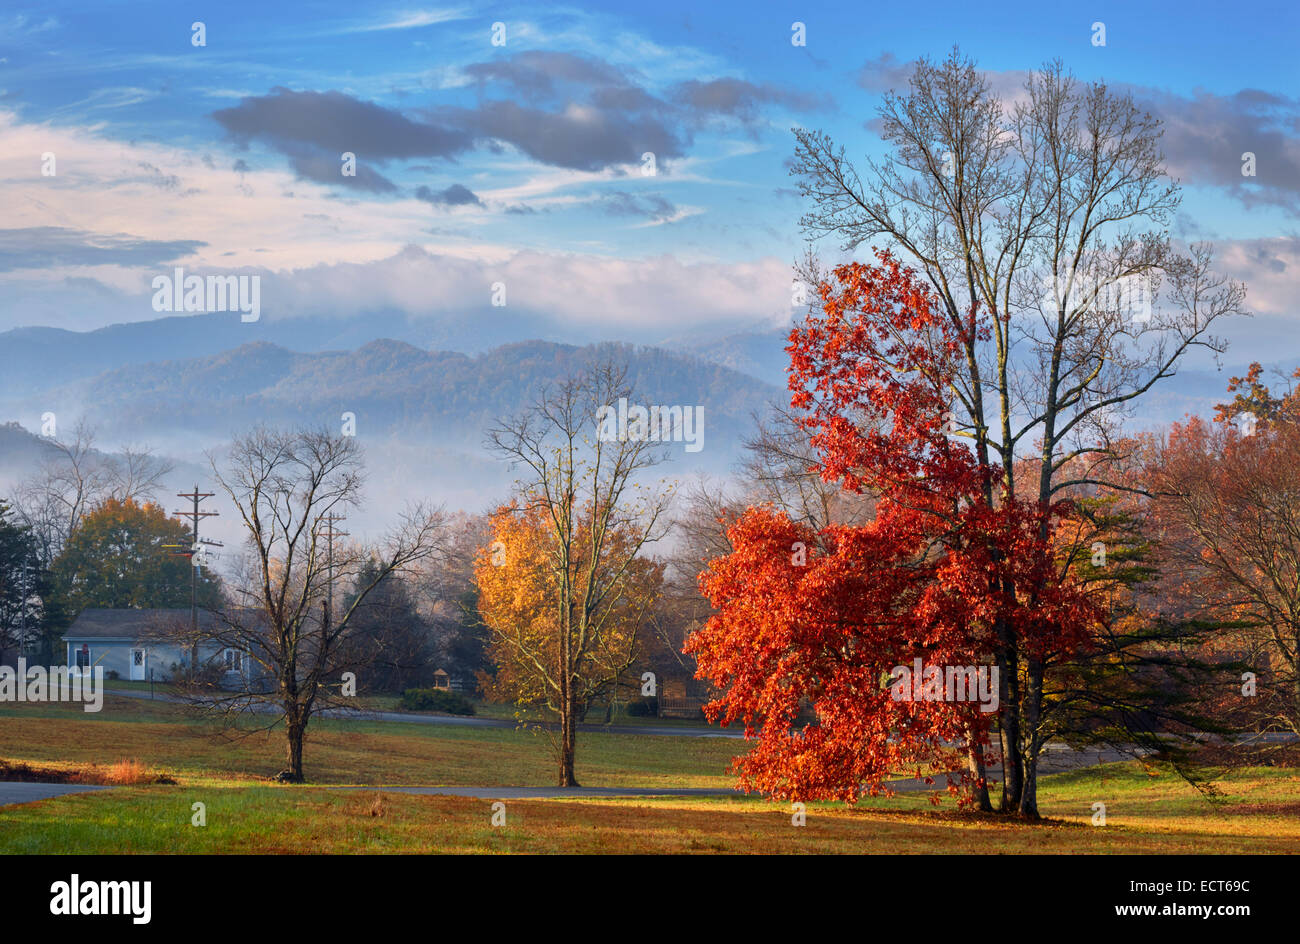 Autumnal trees in the gardens of the Mark Addy Inn with the Blue Ridge Mountains in distance. Nellysford, Virginia, USA. Stock Photo